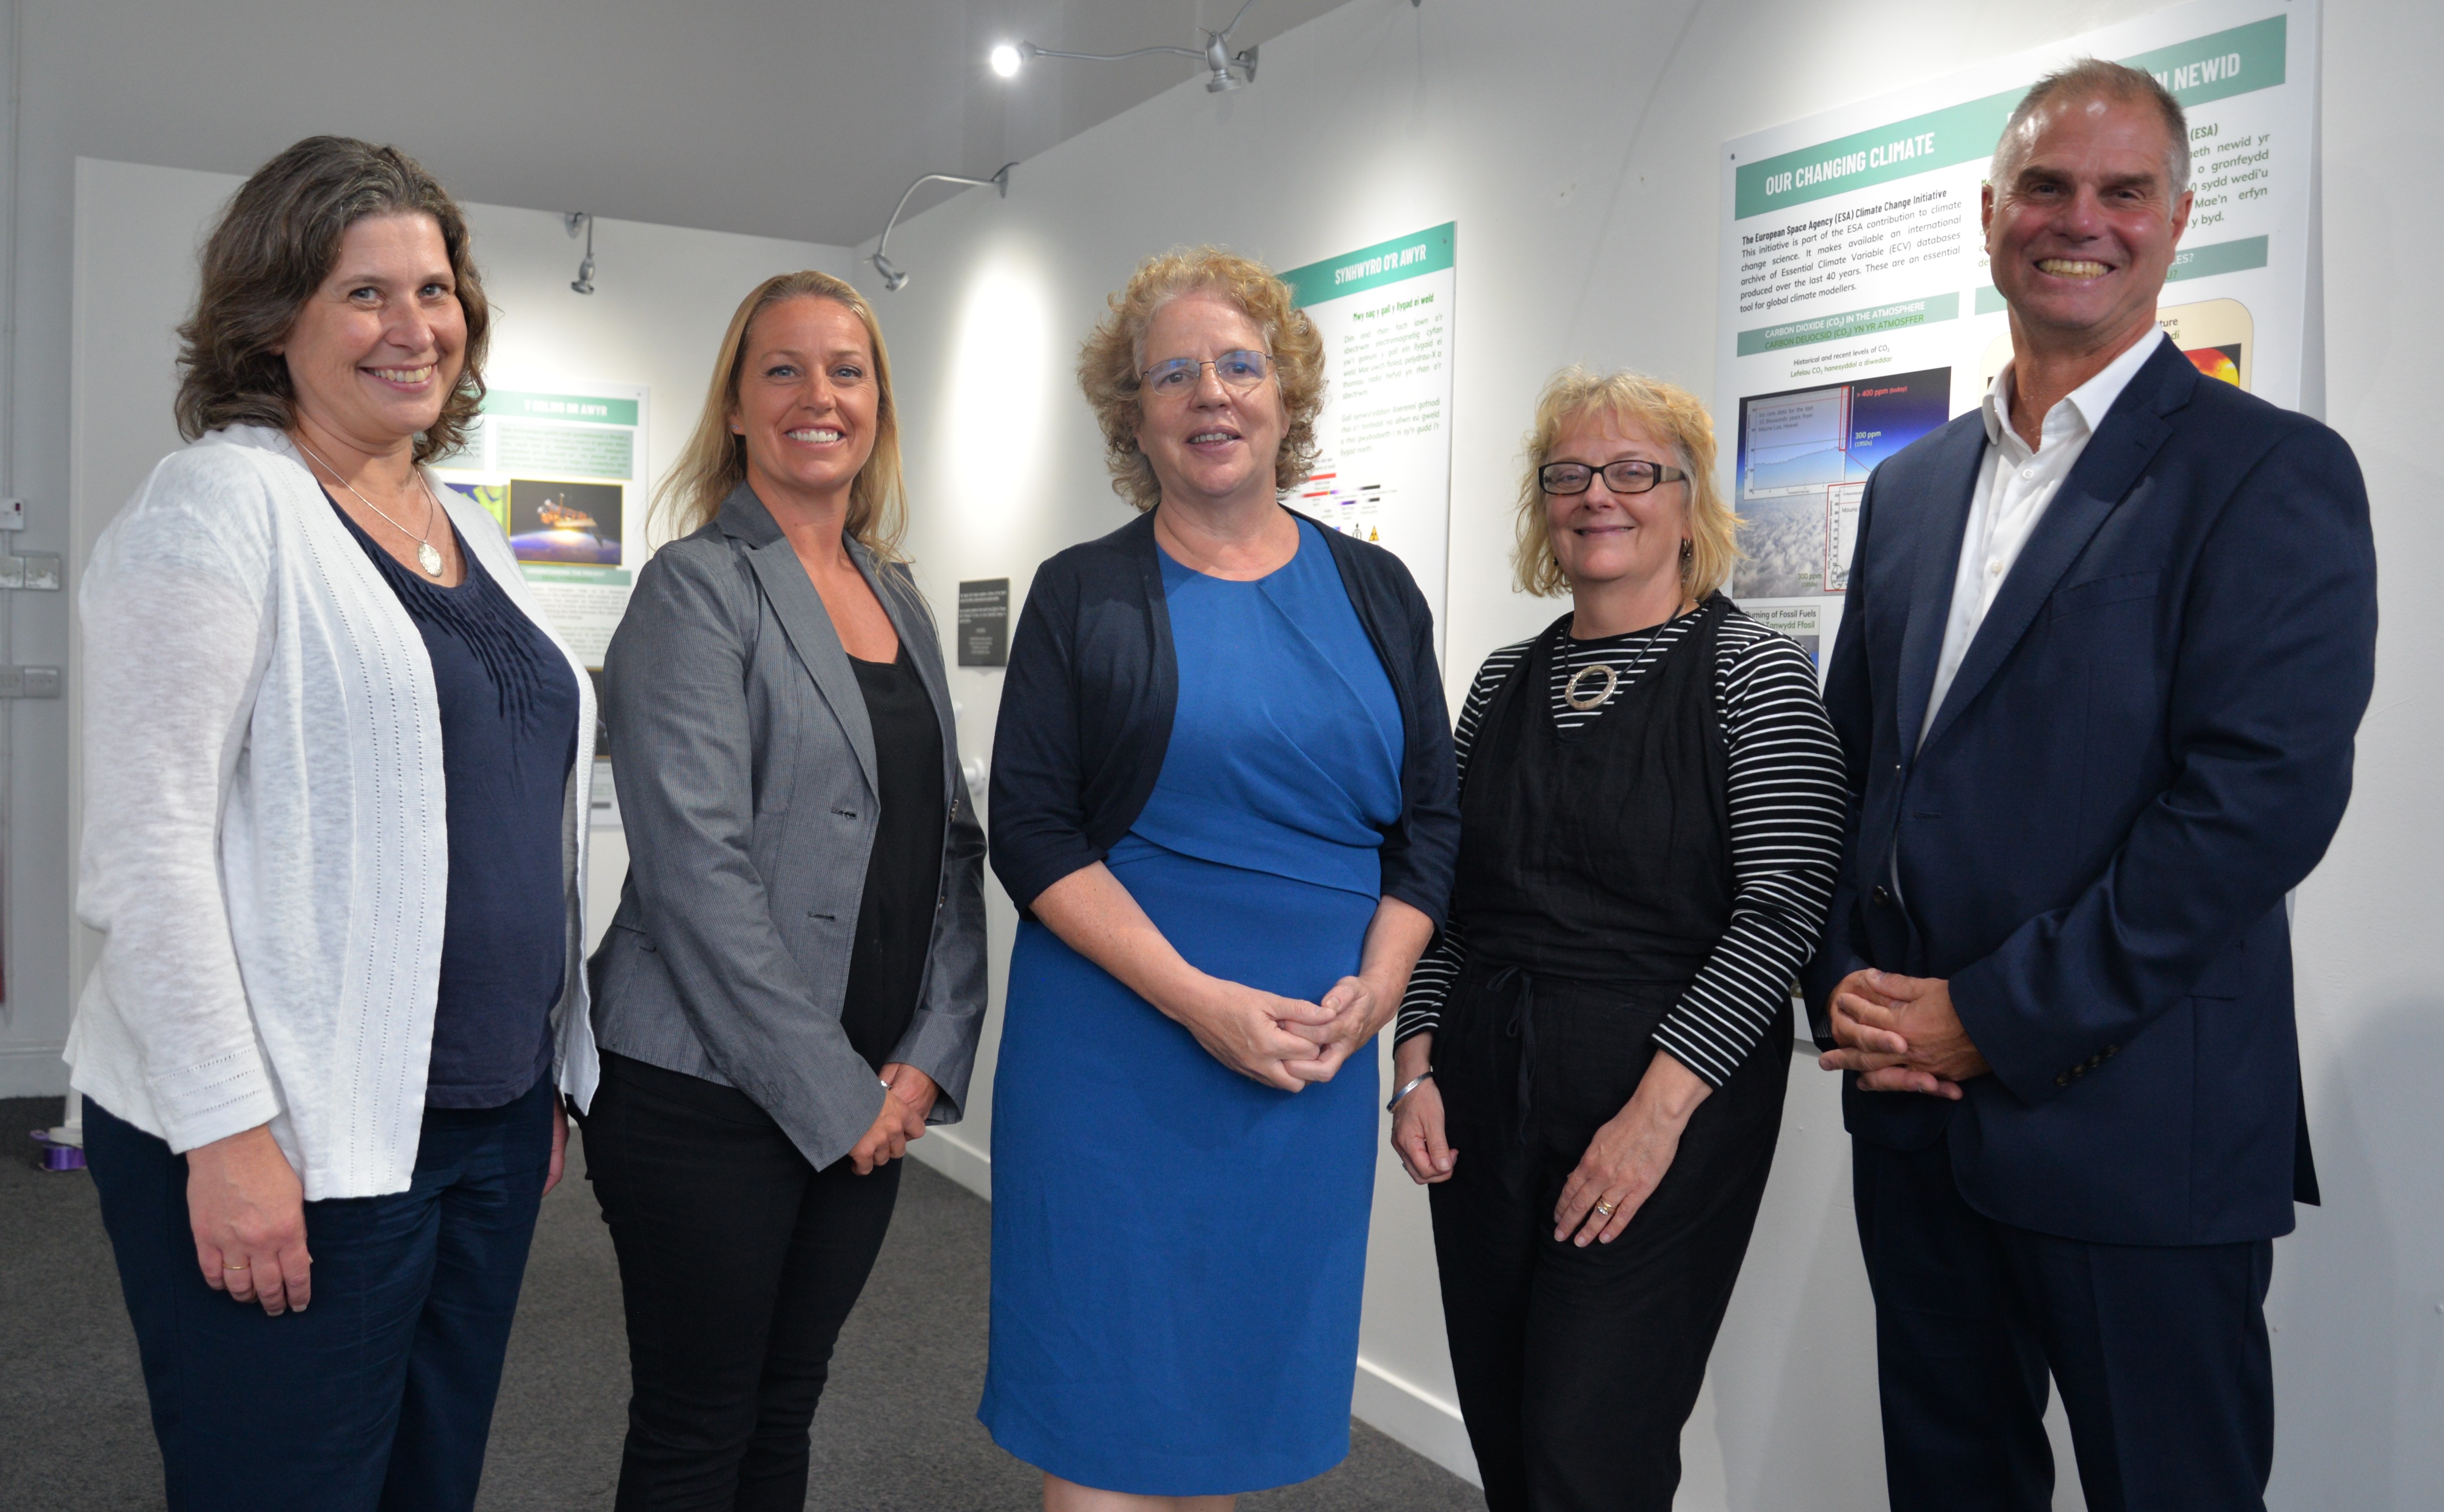 Pictured at the opening of the Living Wales exhibition at Old College are (left to right) Dr Sarah Davies, Head of the Department of Geography and Earth Sciences at Aberystwyth; Claire Horton, Geospatial and Earth Observation Manager, Welsh Government; Professor Elizabeth Treasure, Vice-Chancellor Aberystwyth University; Amanda Smith from the Centre for Alternative Technology and Professor Richard Lucas, Sêr Cymru Chair, Department of Geography and Earth Sciences.